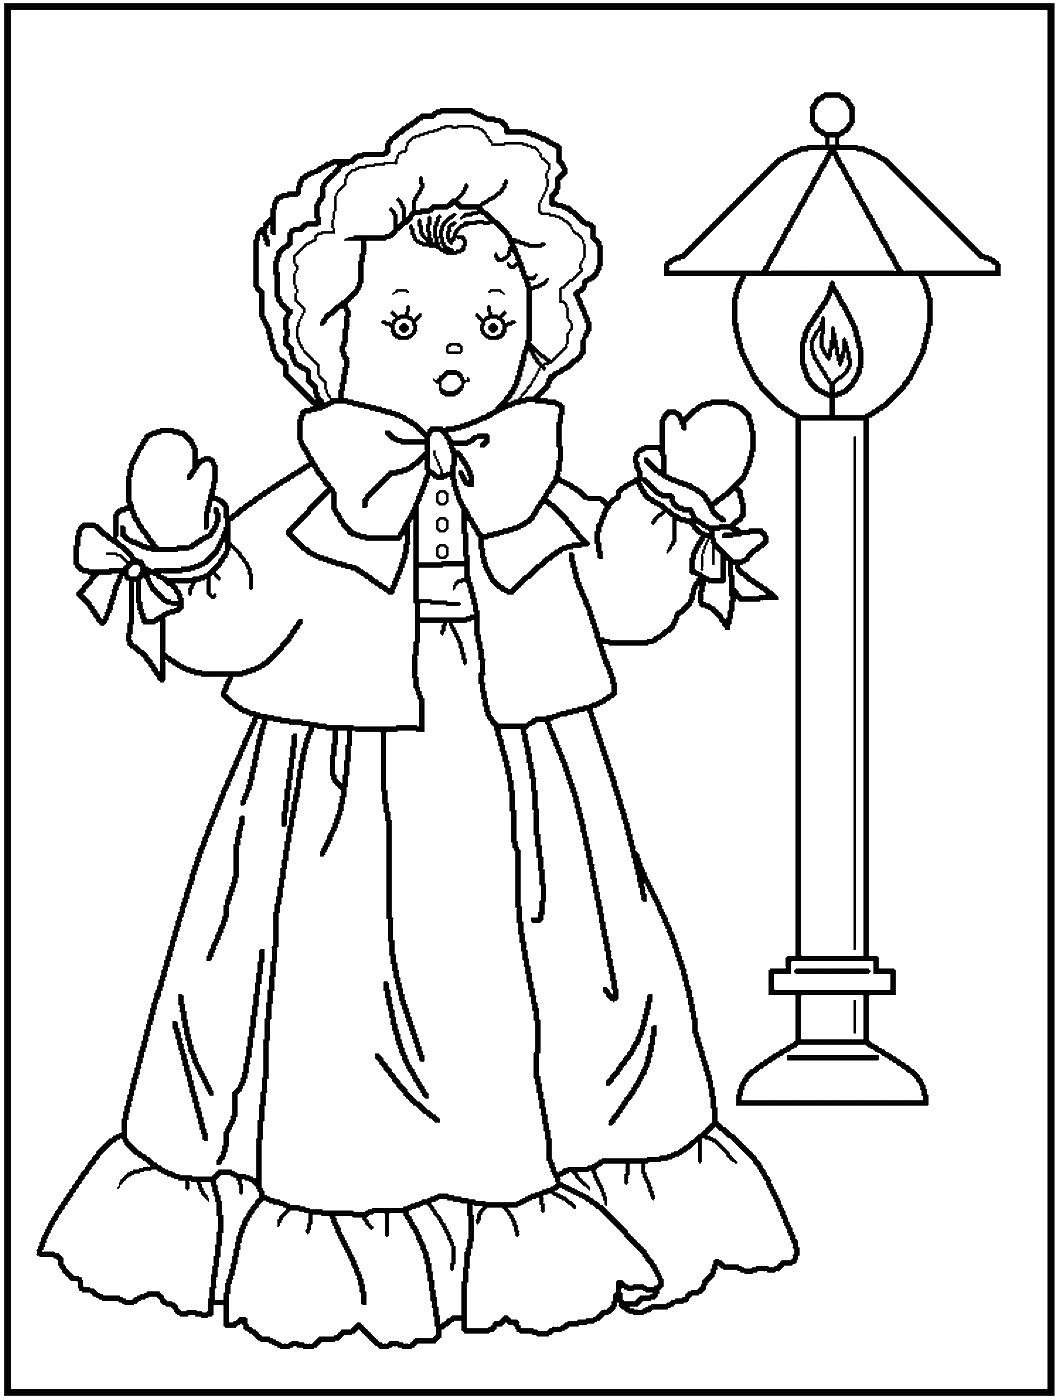 Download Dolls Coloring Pages